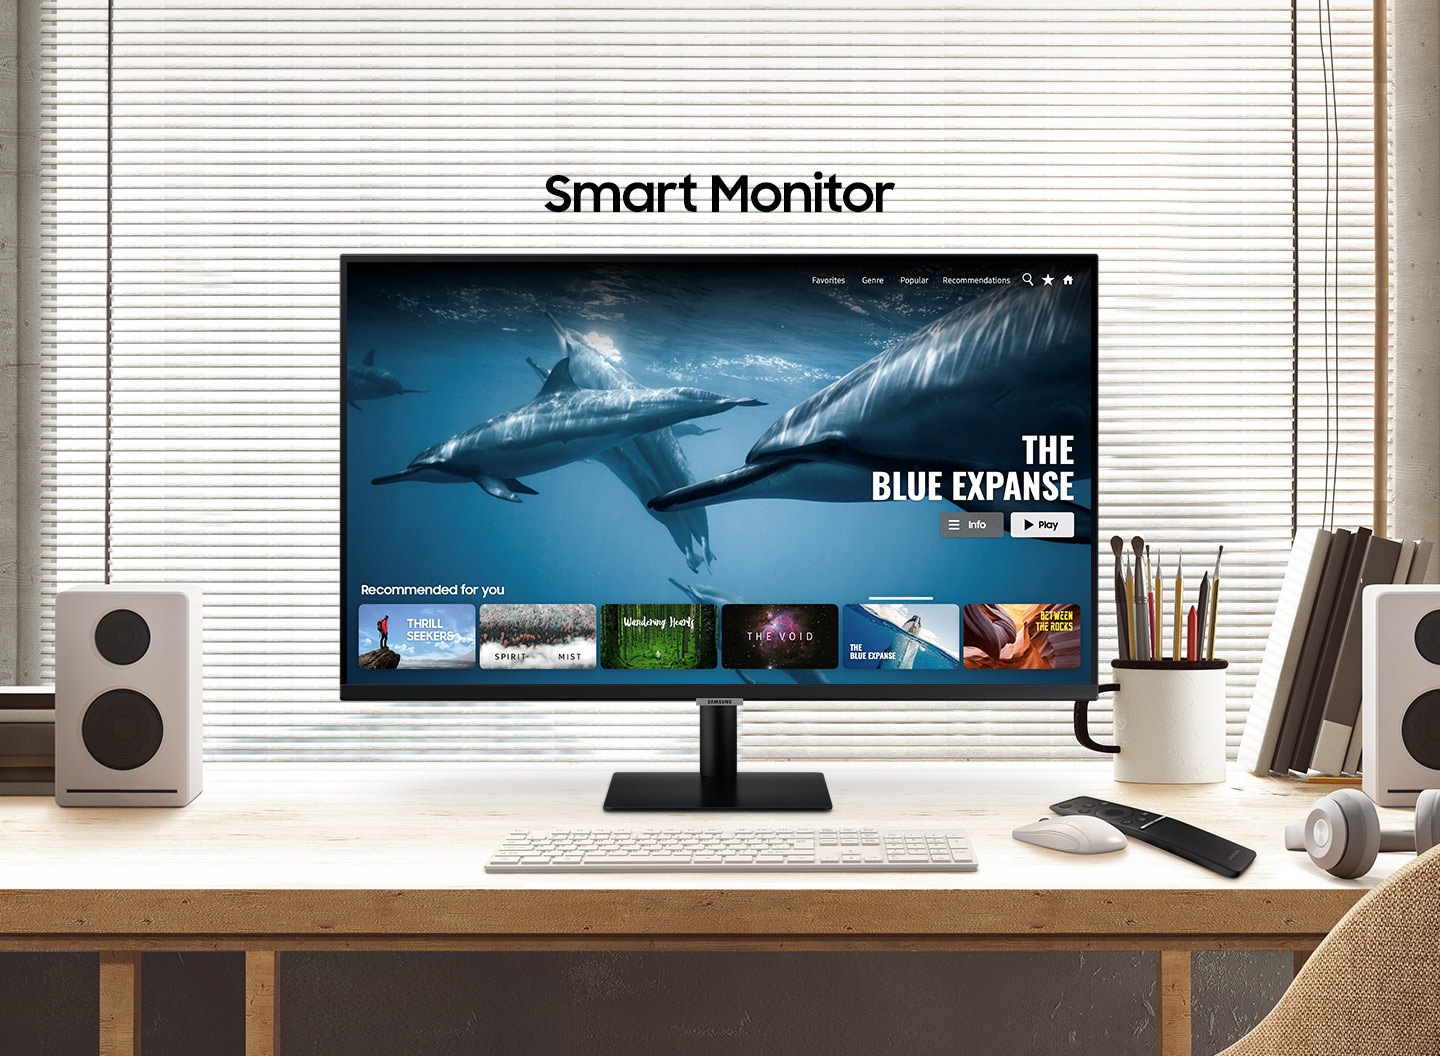 Below the title \One for all,\ a vertical line divides two different images of a monitor. The line slides right to reveal an office desk with powerpoint on the monitor and the words \Work Smart\, and slides left to reveal a home desk with a movie playing on the monitor and the words \Play Smart.\